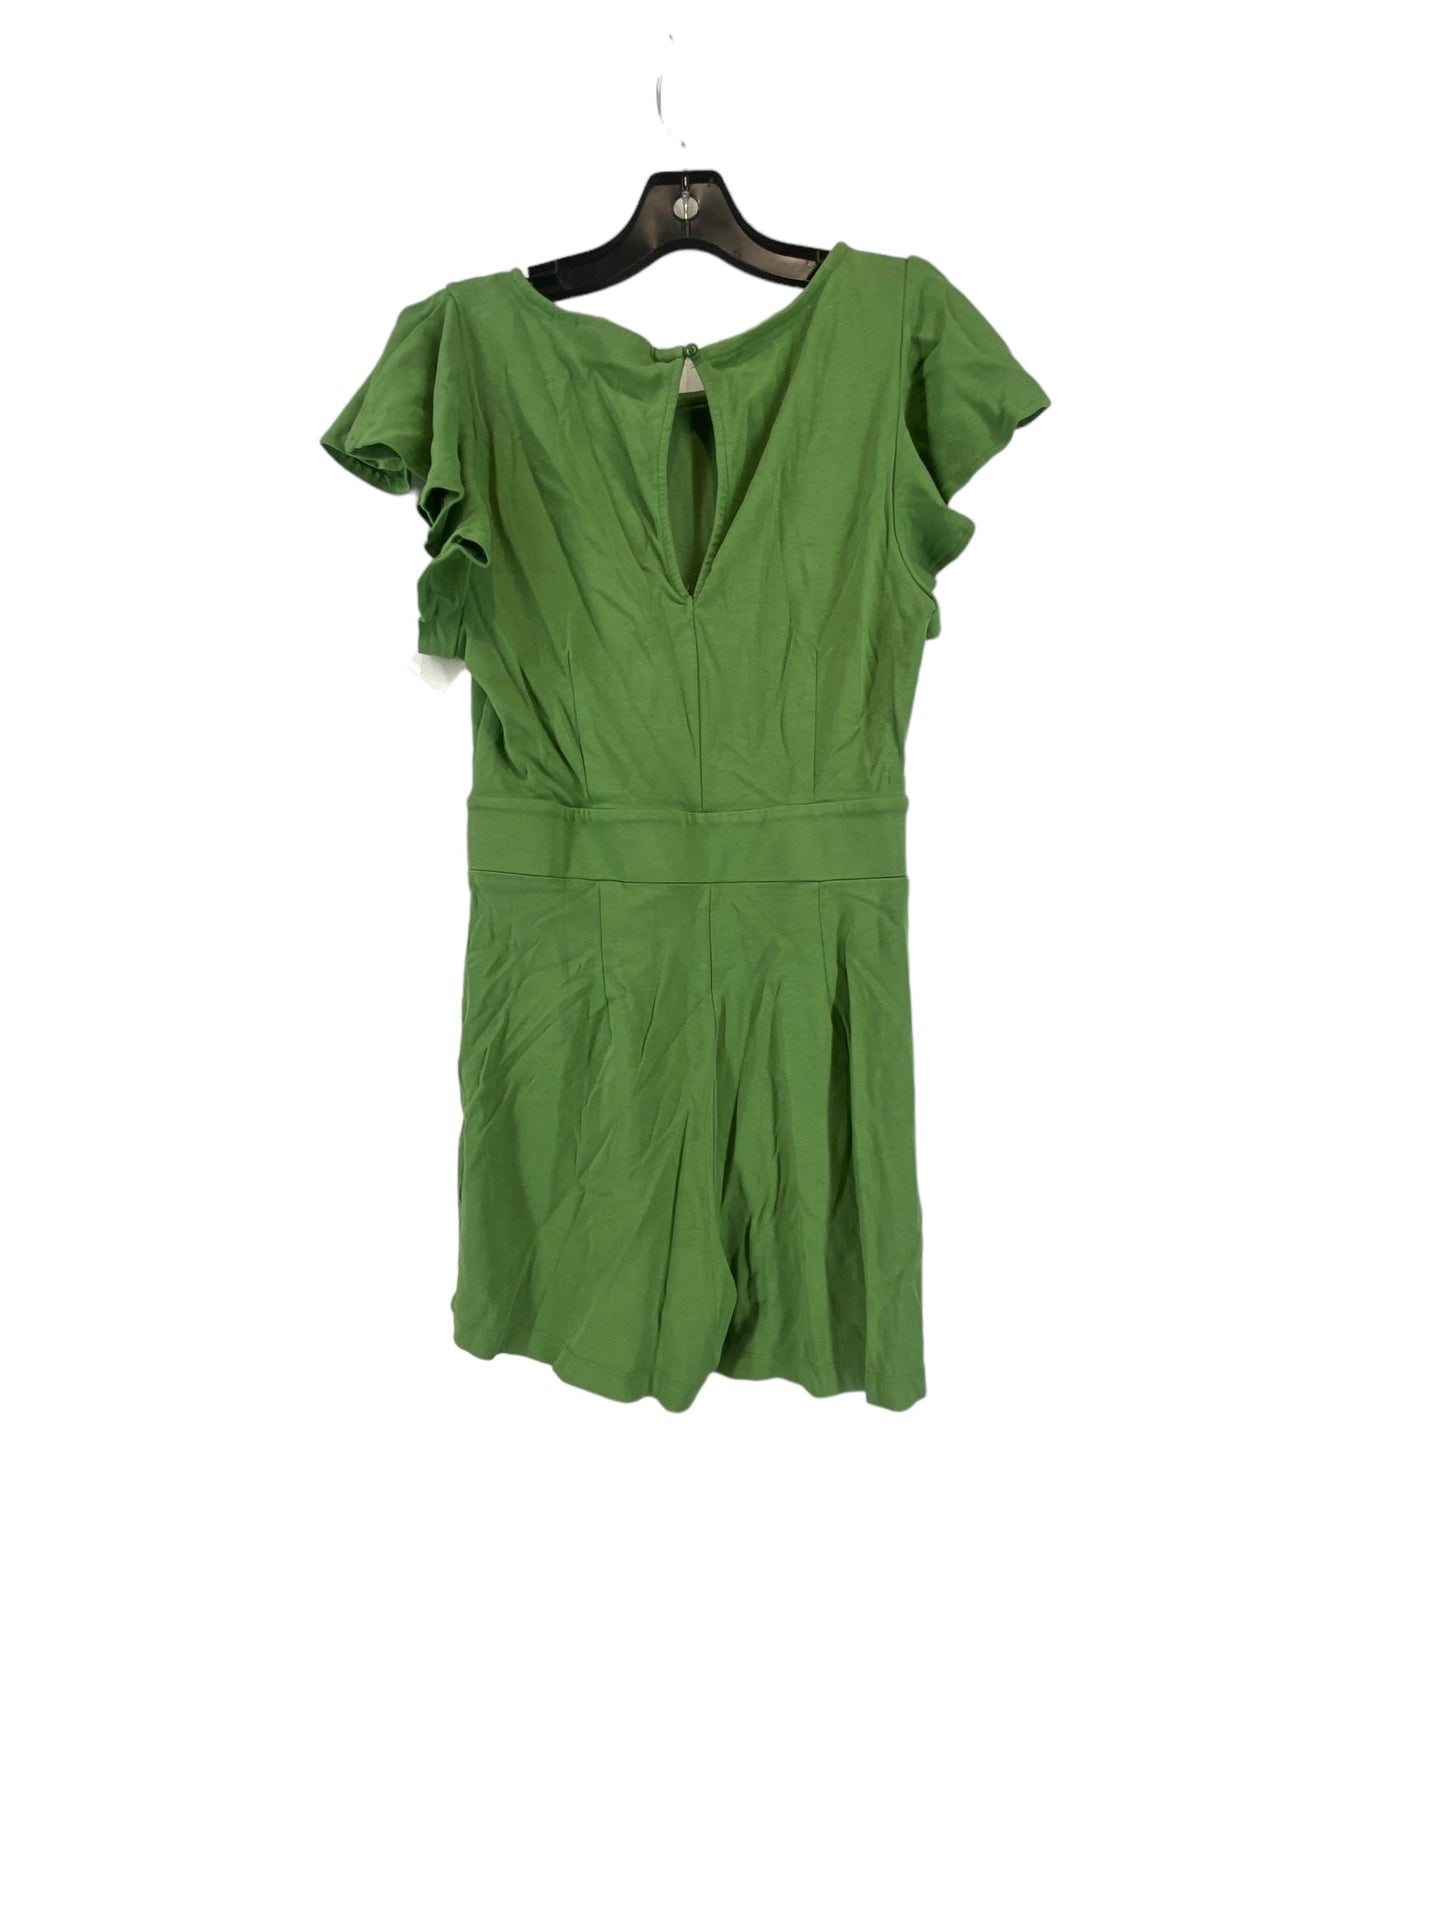 Green Romper New York And Co, Size M